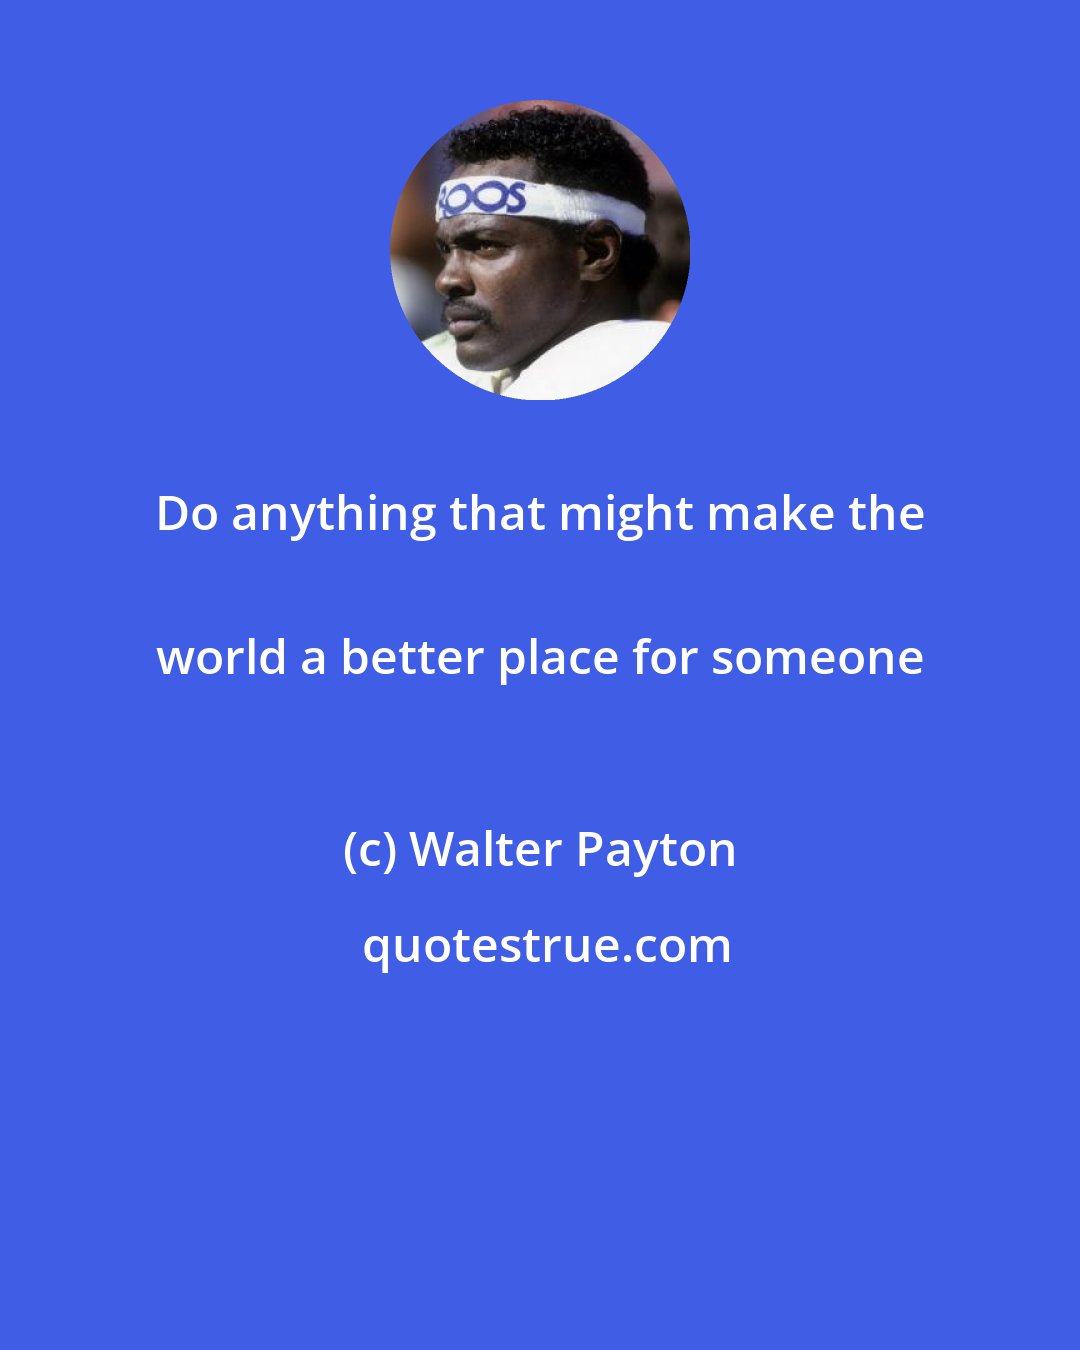 Walter Payton: Do anything that might make the 
 world a better place for someone